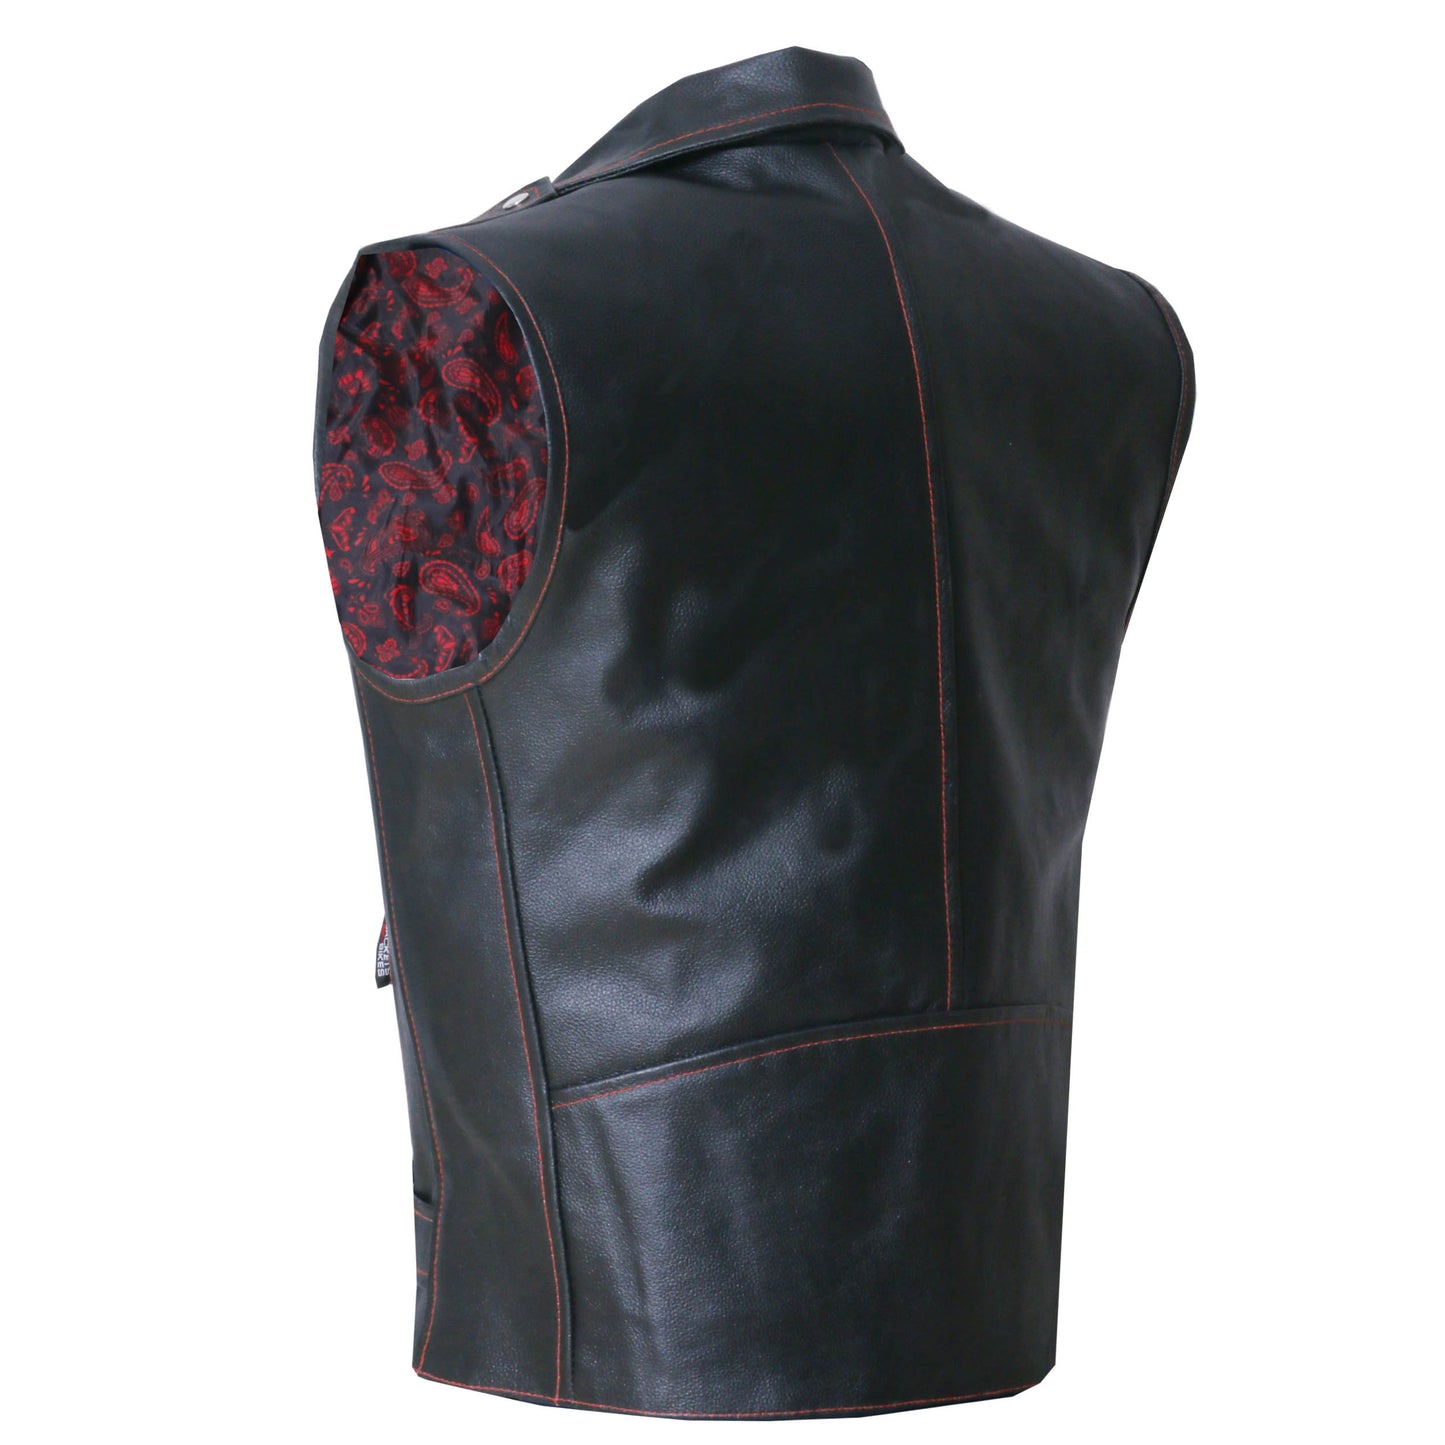 Men's Classic Leather Motorcycle Biker Concealed Carry Vintage Vest Paisley Red